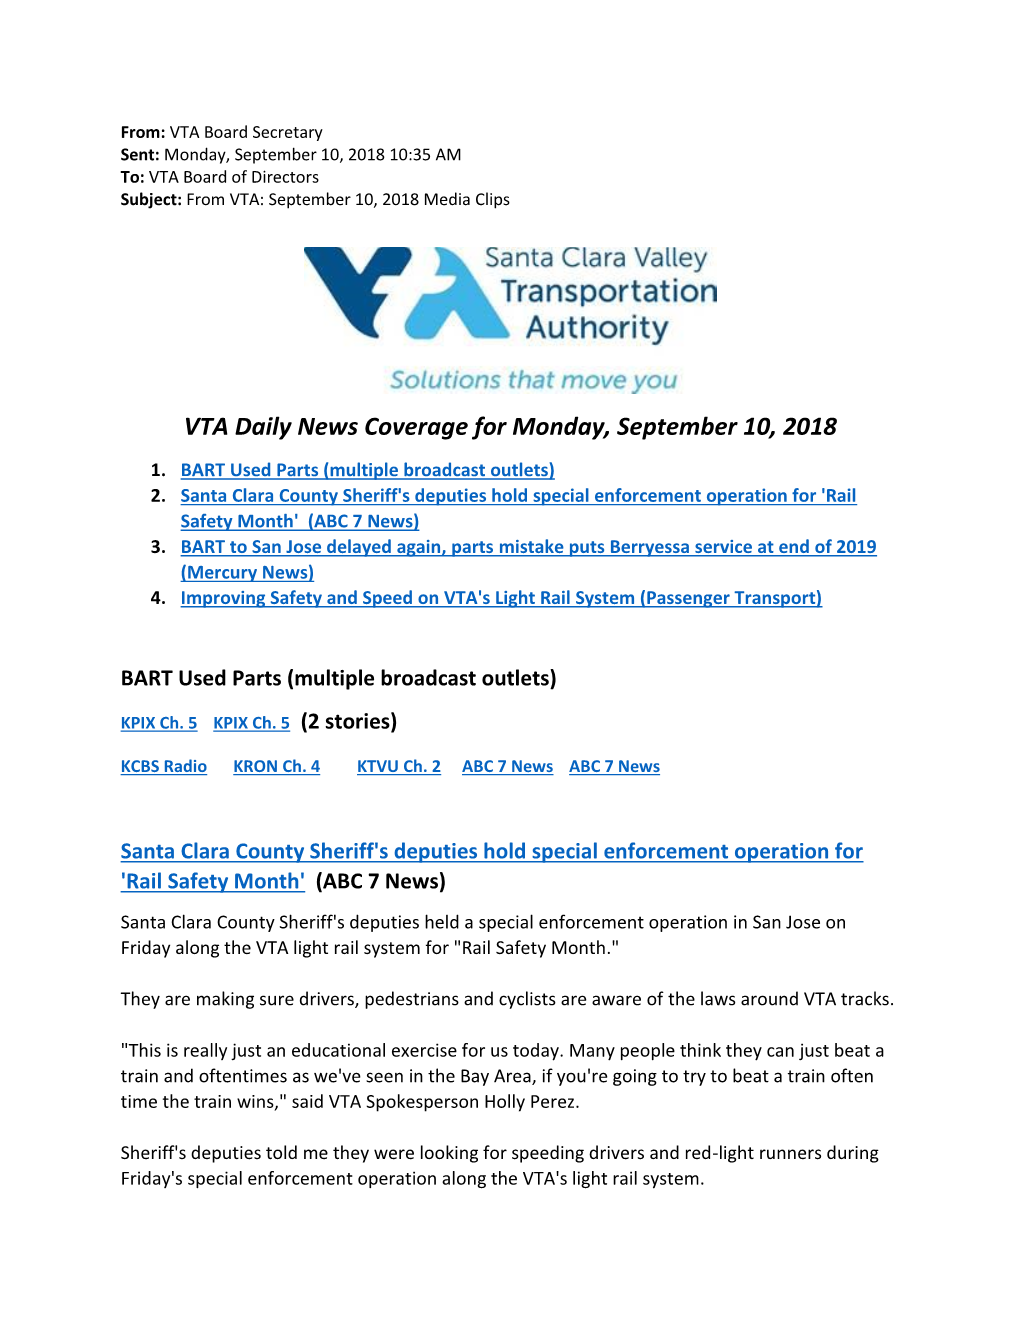 VTA Daily News Coverage for Monday, September 10, 2018 1